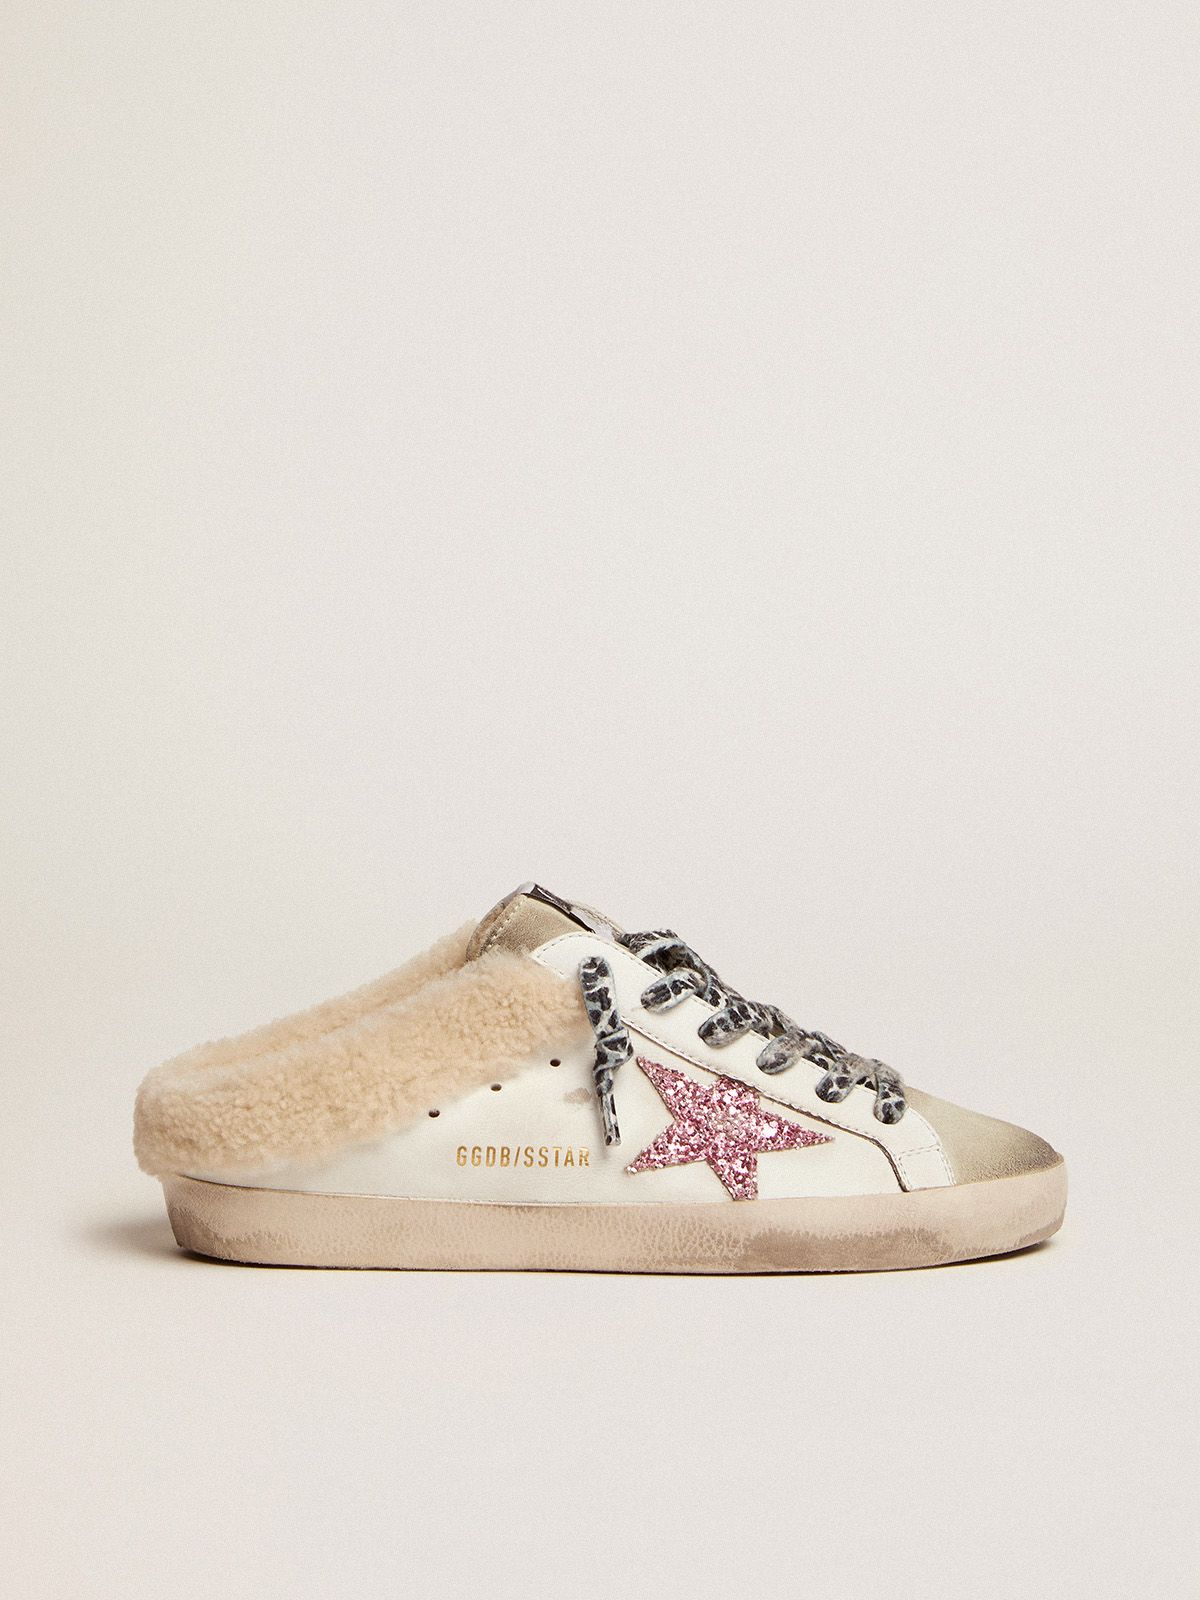 golden goose star glitter lining pink Sabots Super-Star and shearling with